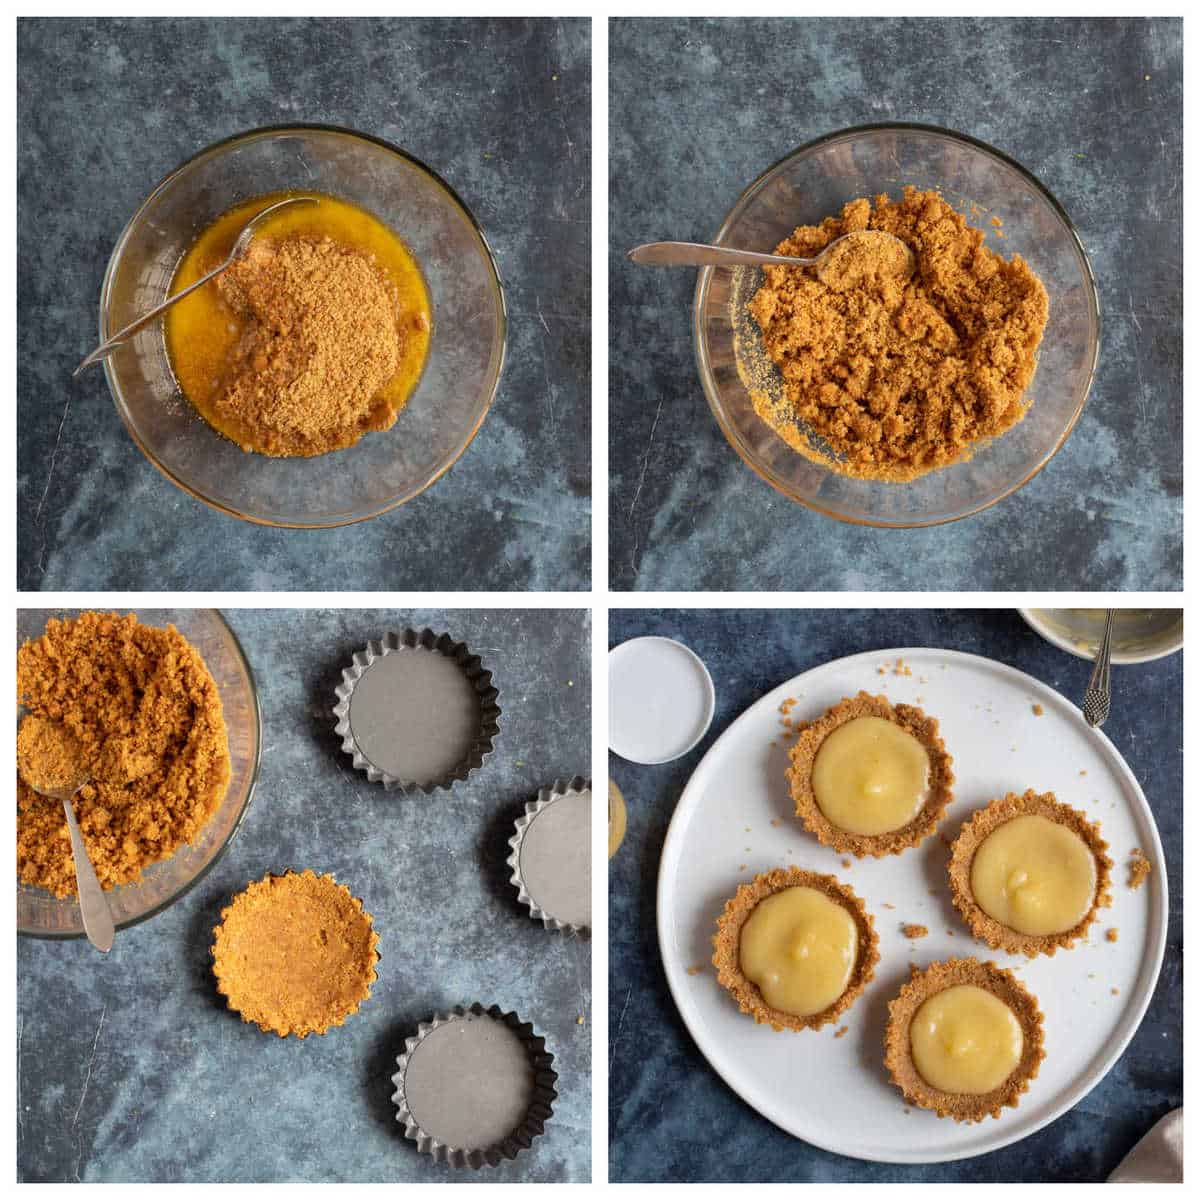 Step by step photo instructions for making the lemon curd tartlets.